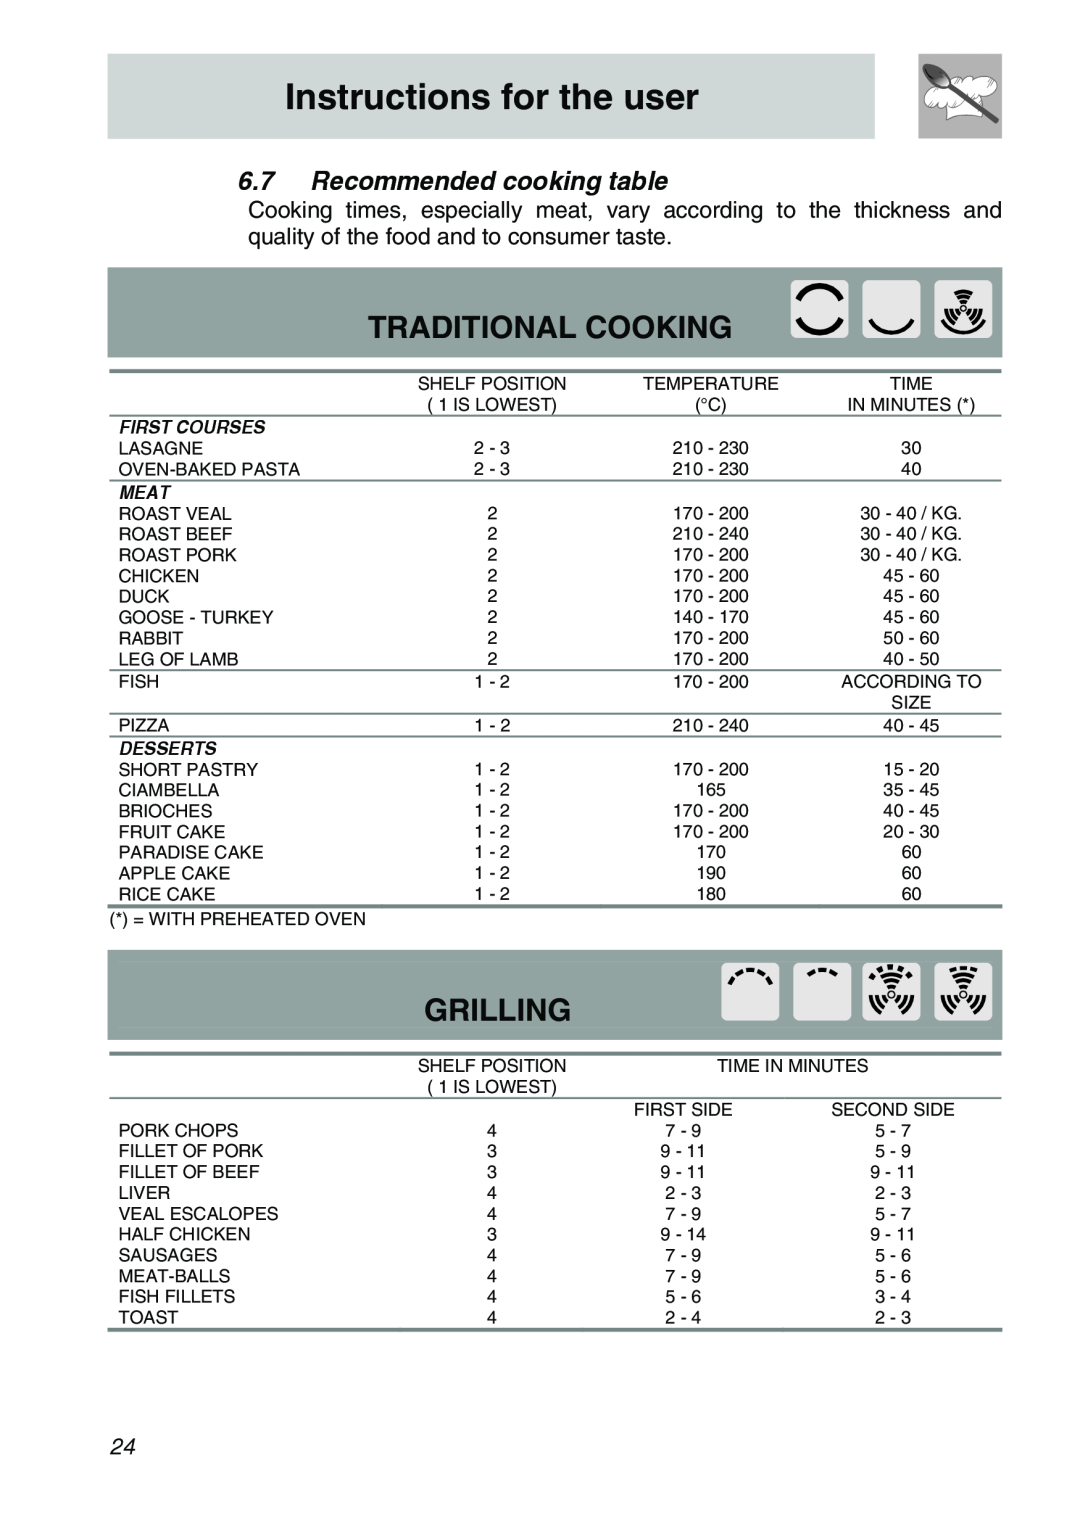 Smeg SCA310X Traditional Cooking, Grilling, 6.7Recommended cooking table, Instructions for the user, First Courses, Meat 